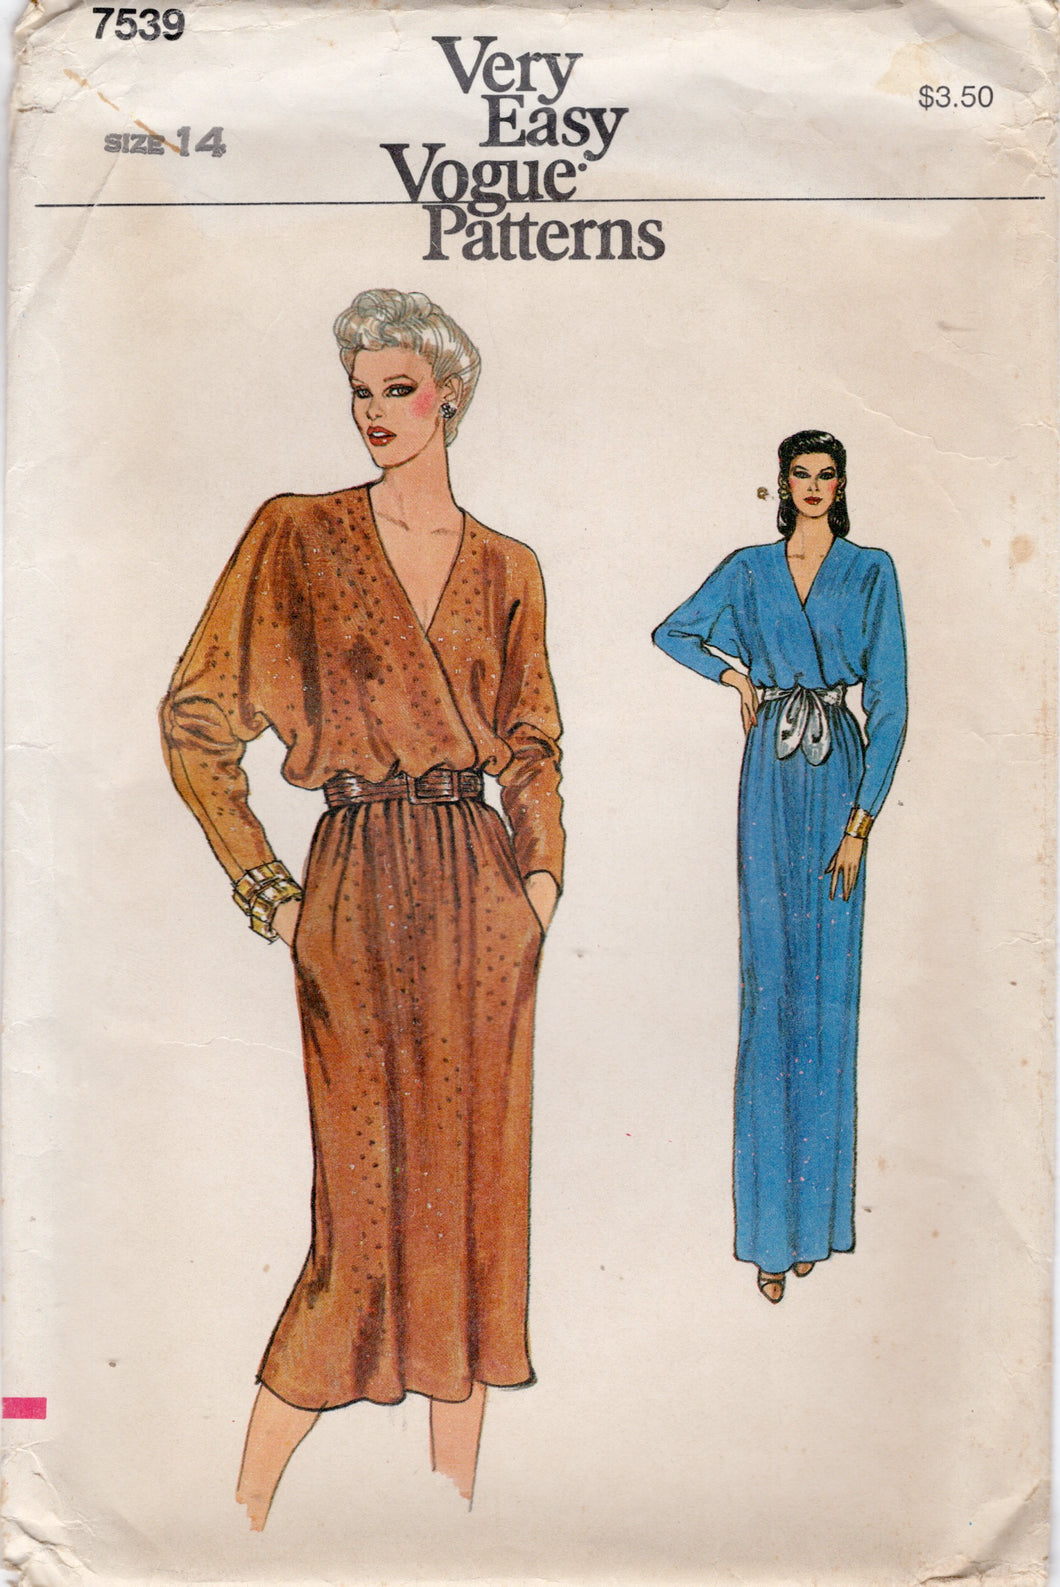 1980's Vogue Surplice Bodice Dress Pattern with Dolman Sleeves - Bust 36